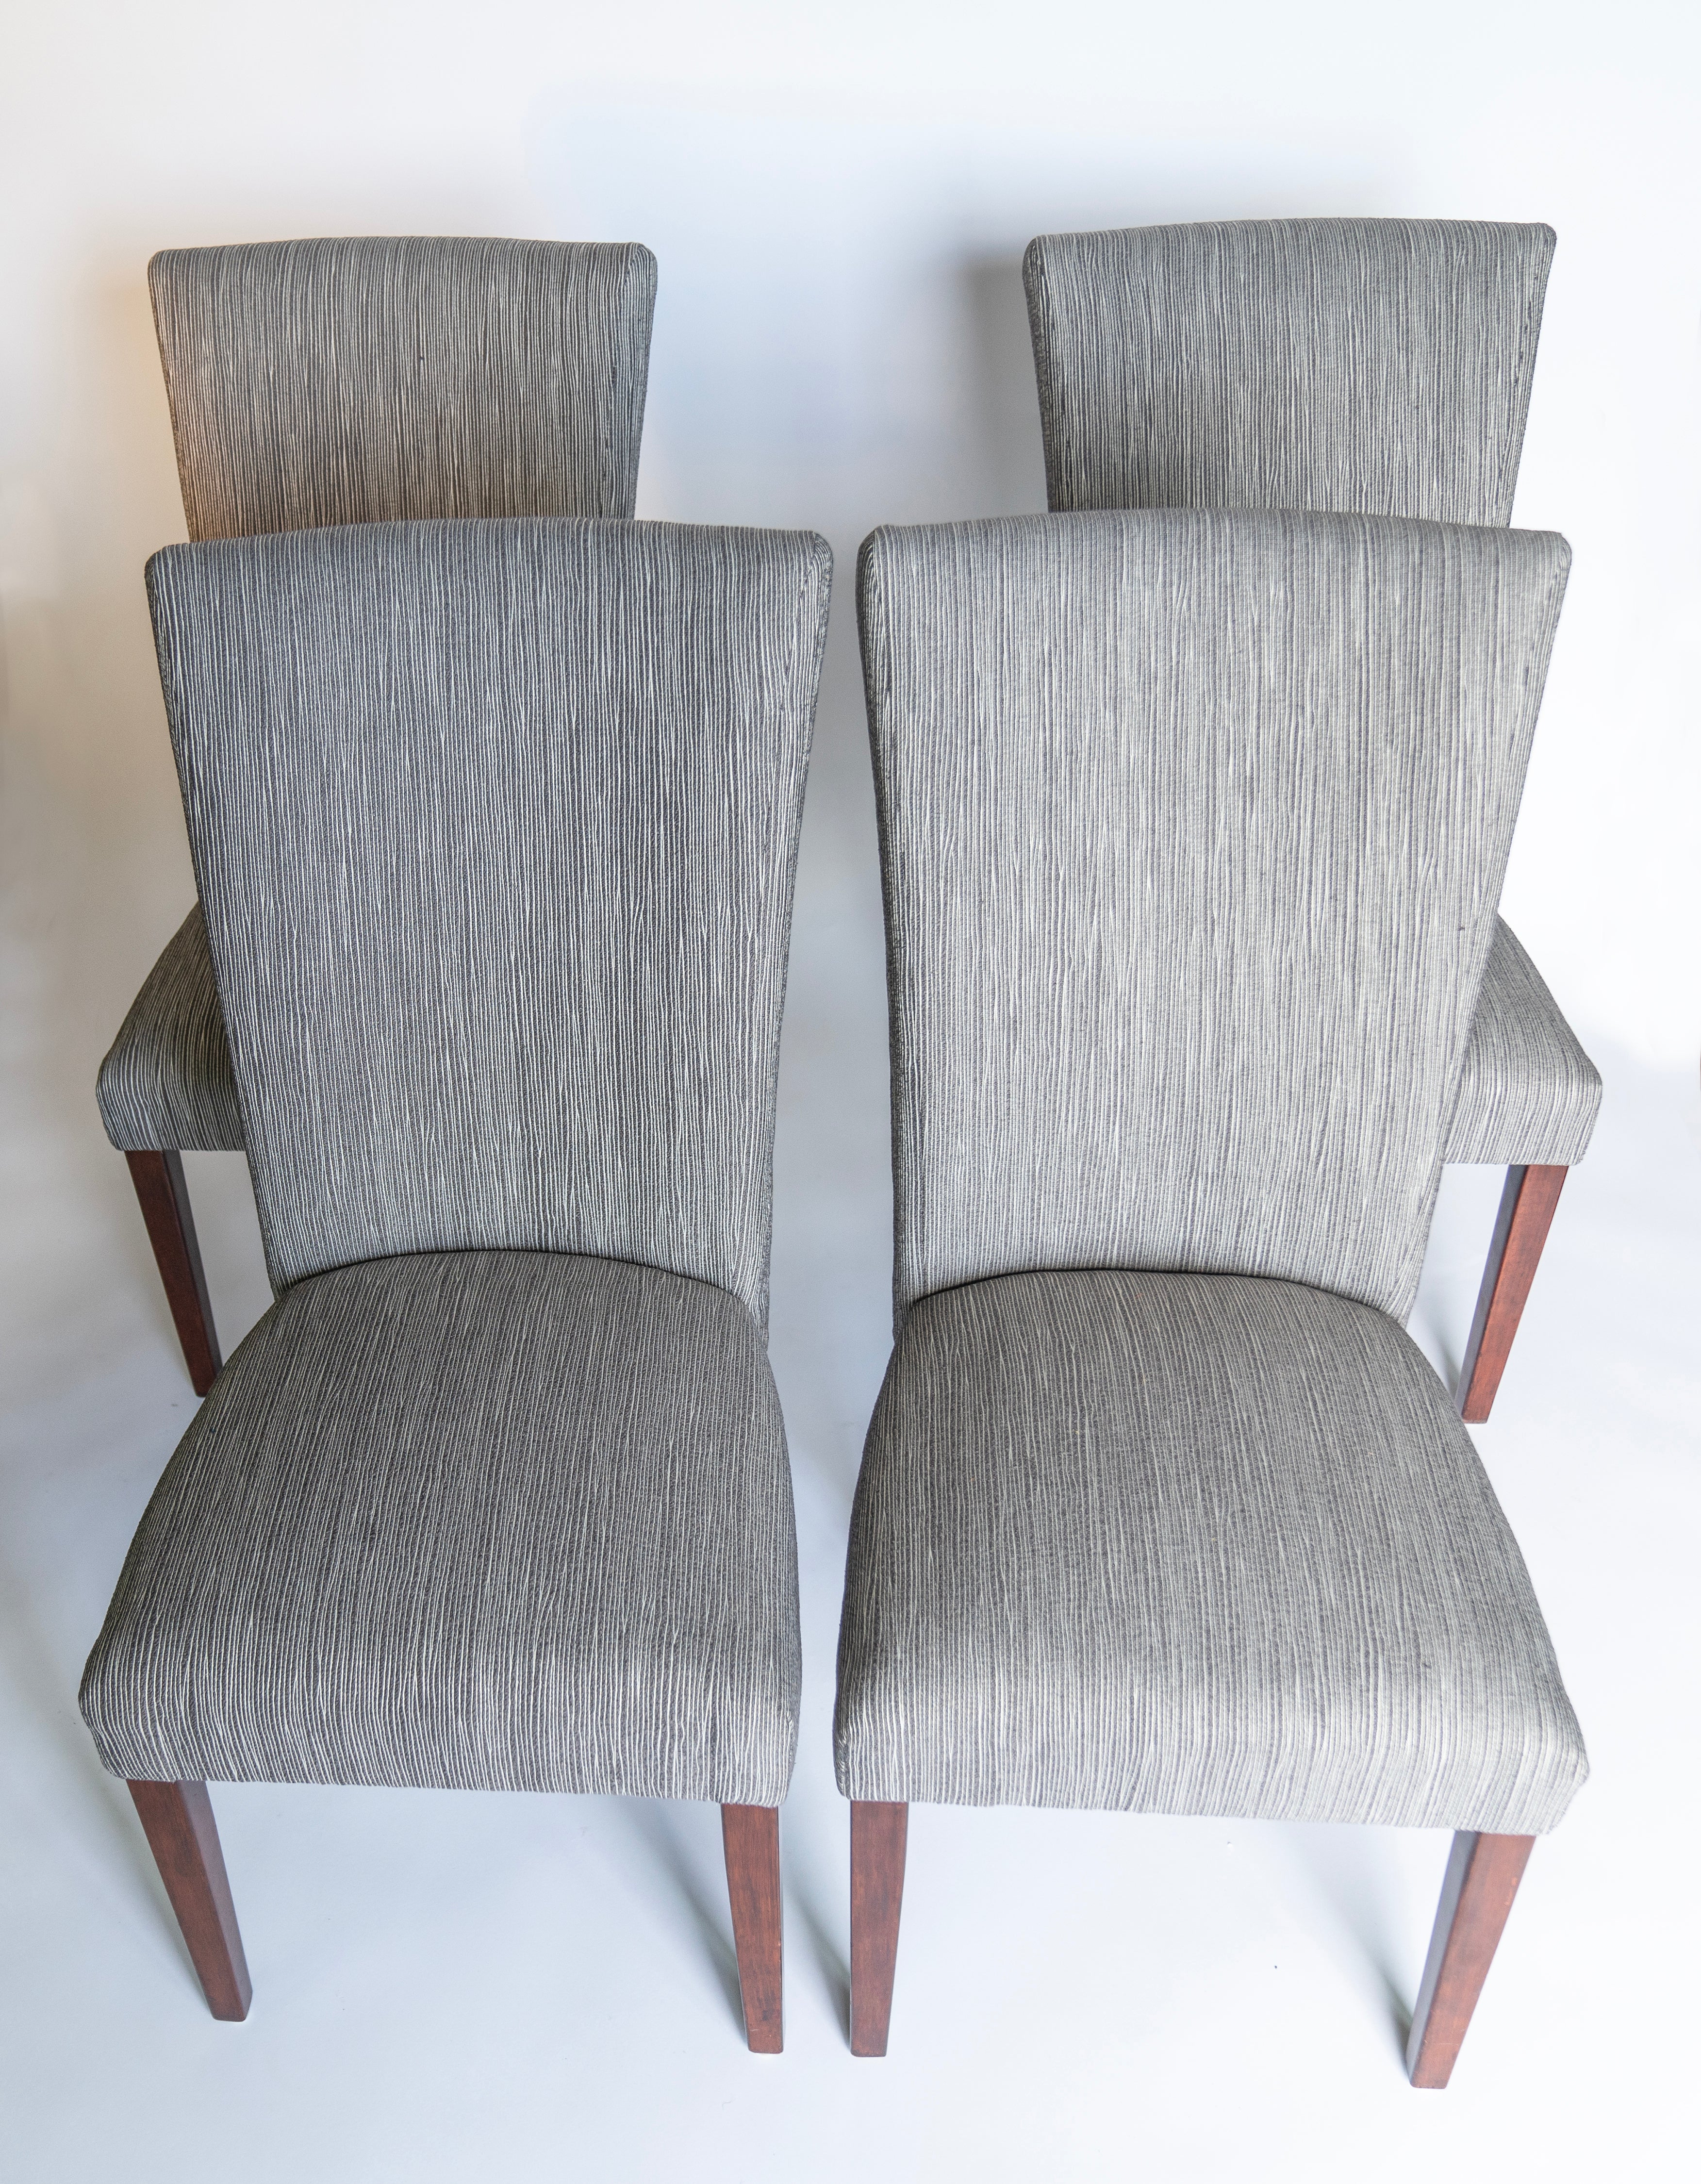 Brown and Cream Waterfalls Dining Chairs